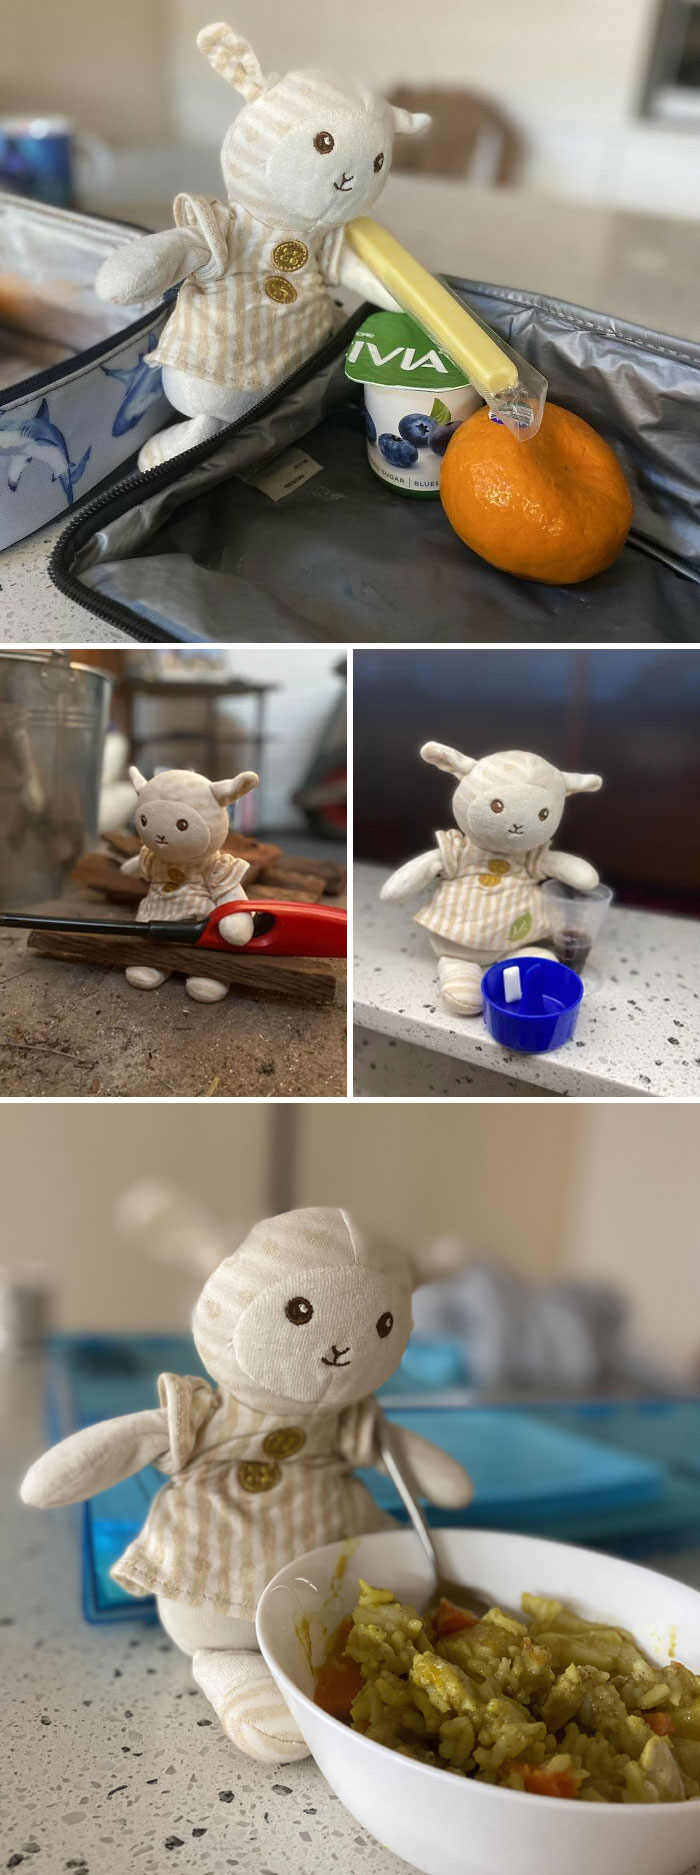 My Daughter Forgot Her Favorite Toy In The Car And Was Extremely Upset. I Sent Her Photos To Show Her That Sheepy Was Alright And Helping Me At Work